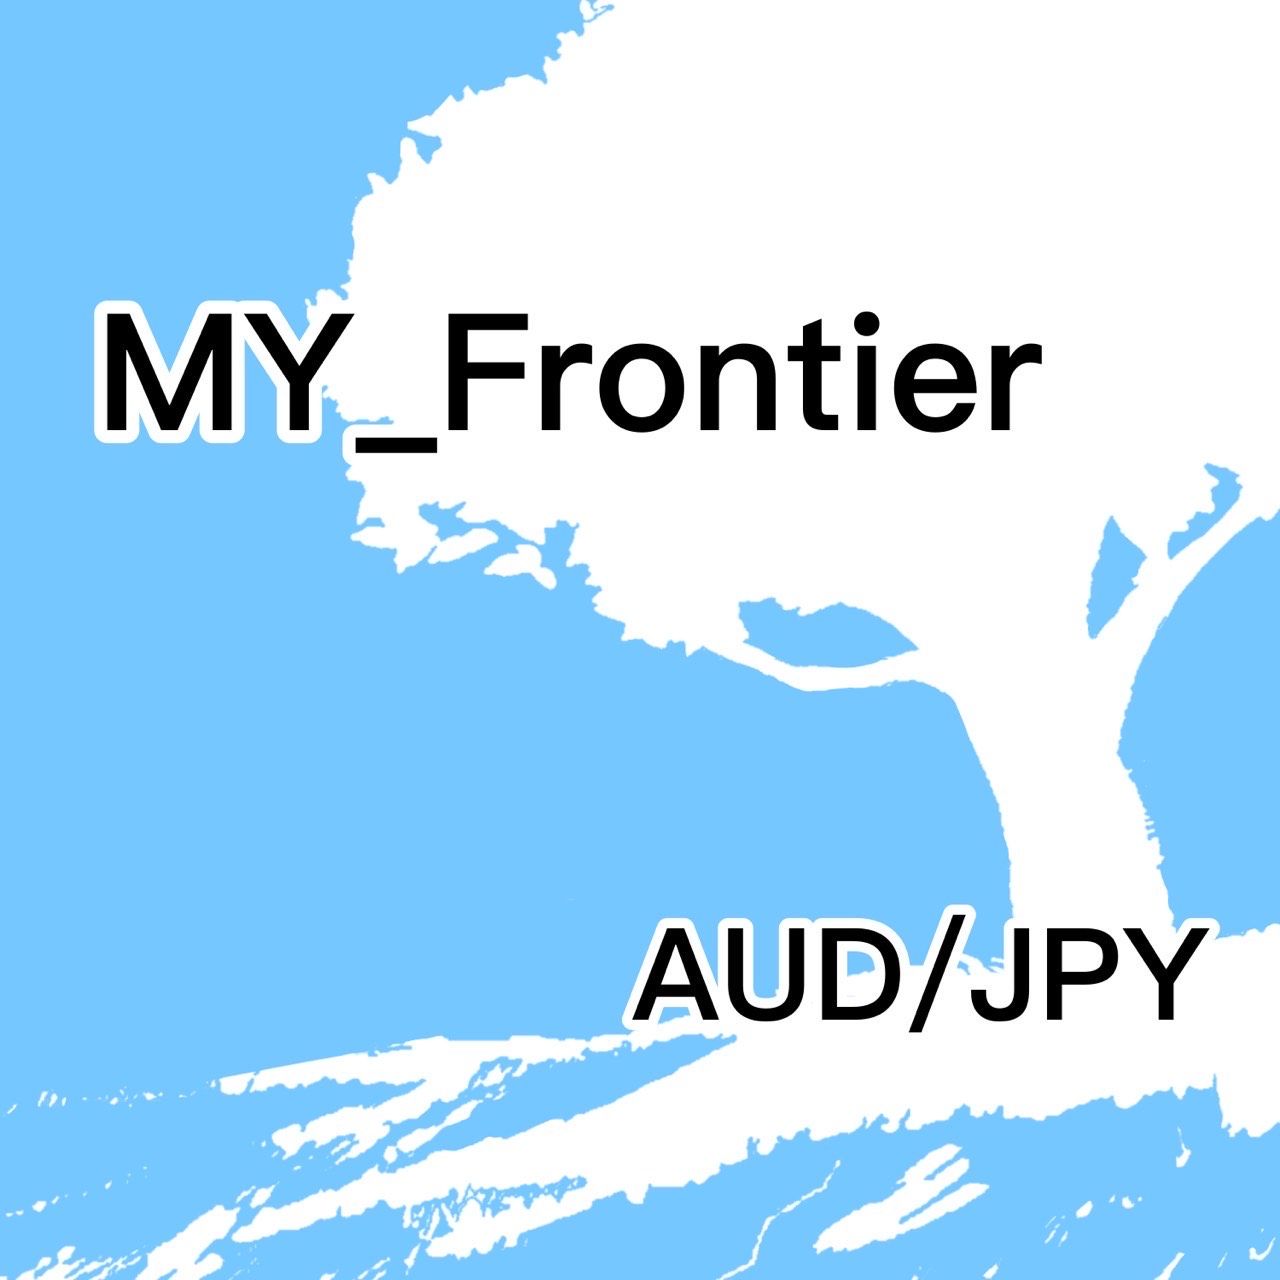 MY_Frontier_AUDJPY Auto Trading